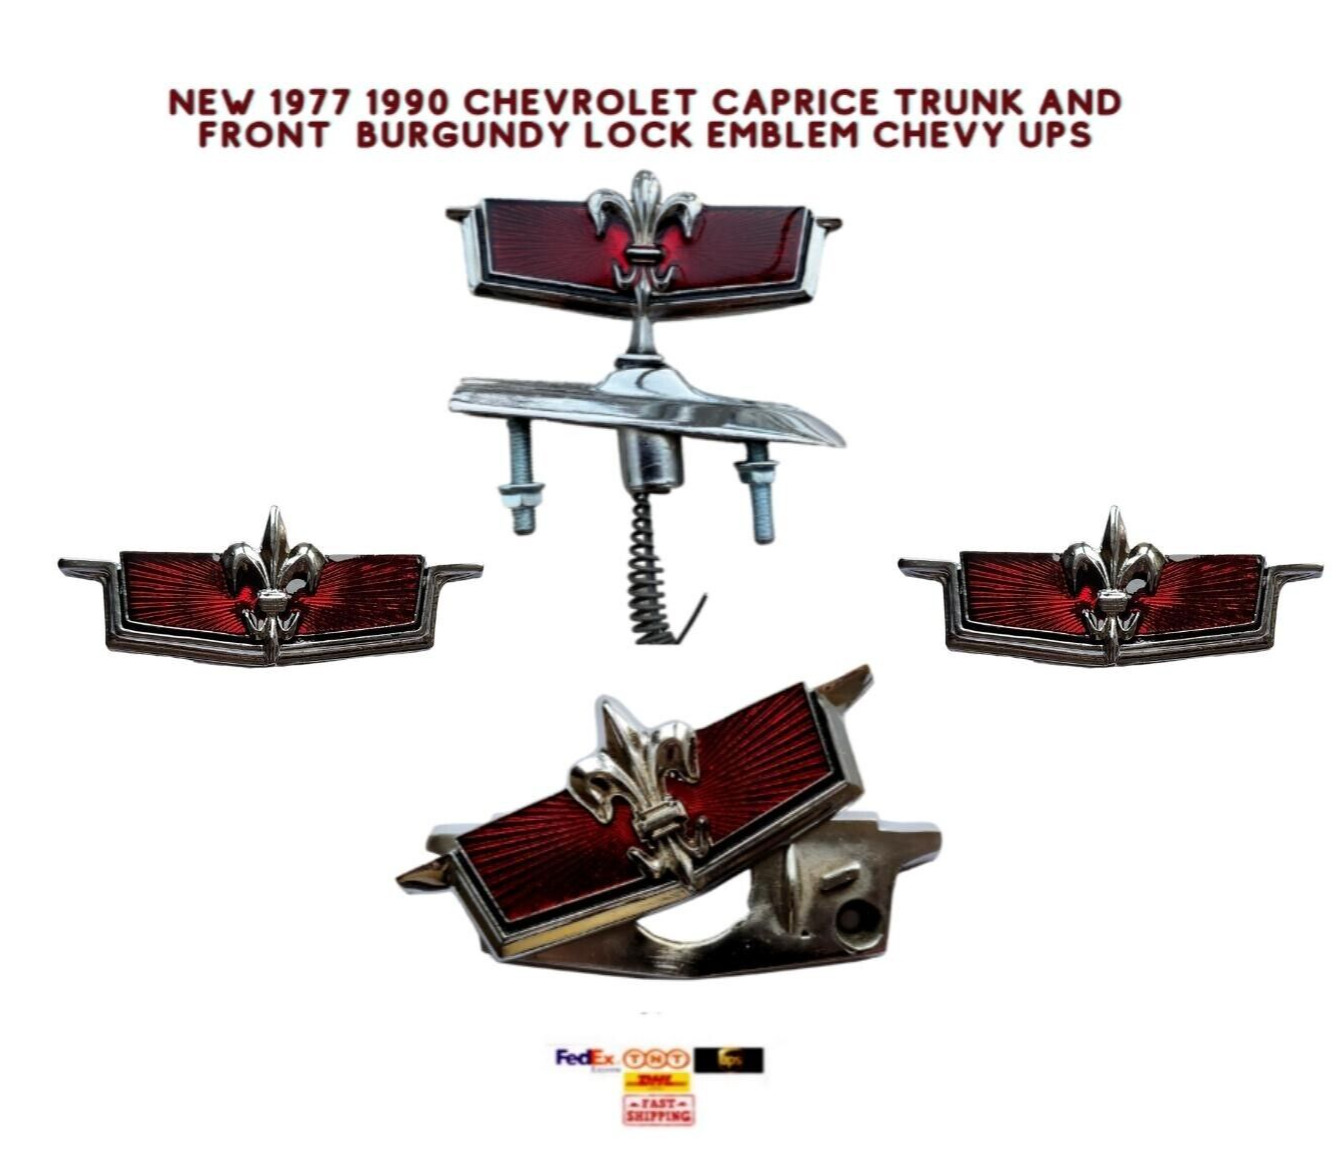 NEW 1977 1990 CHEVROLET CAPRICE TRUNK AND FRONT  BURGUNDY LOCK EMBLEM CHEVY UPS